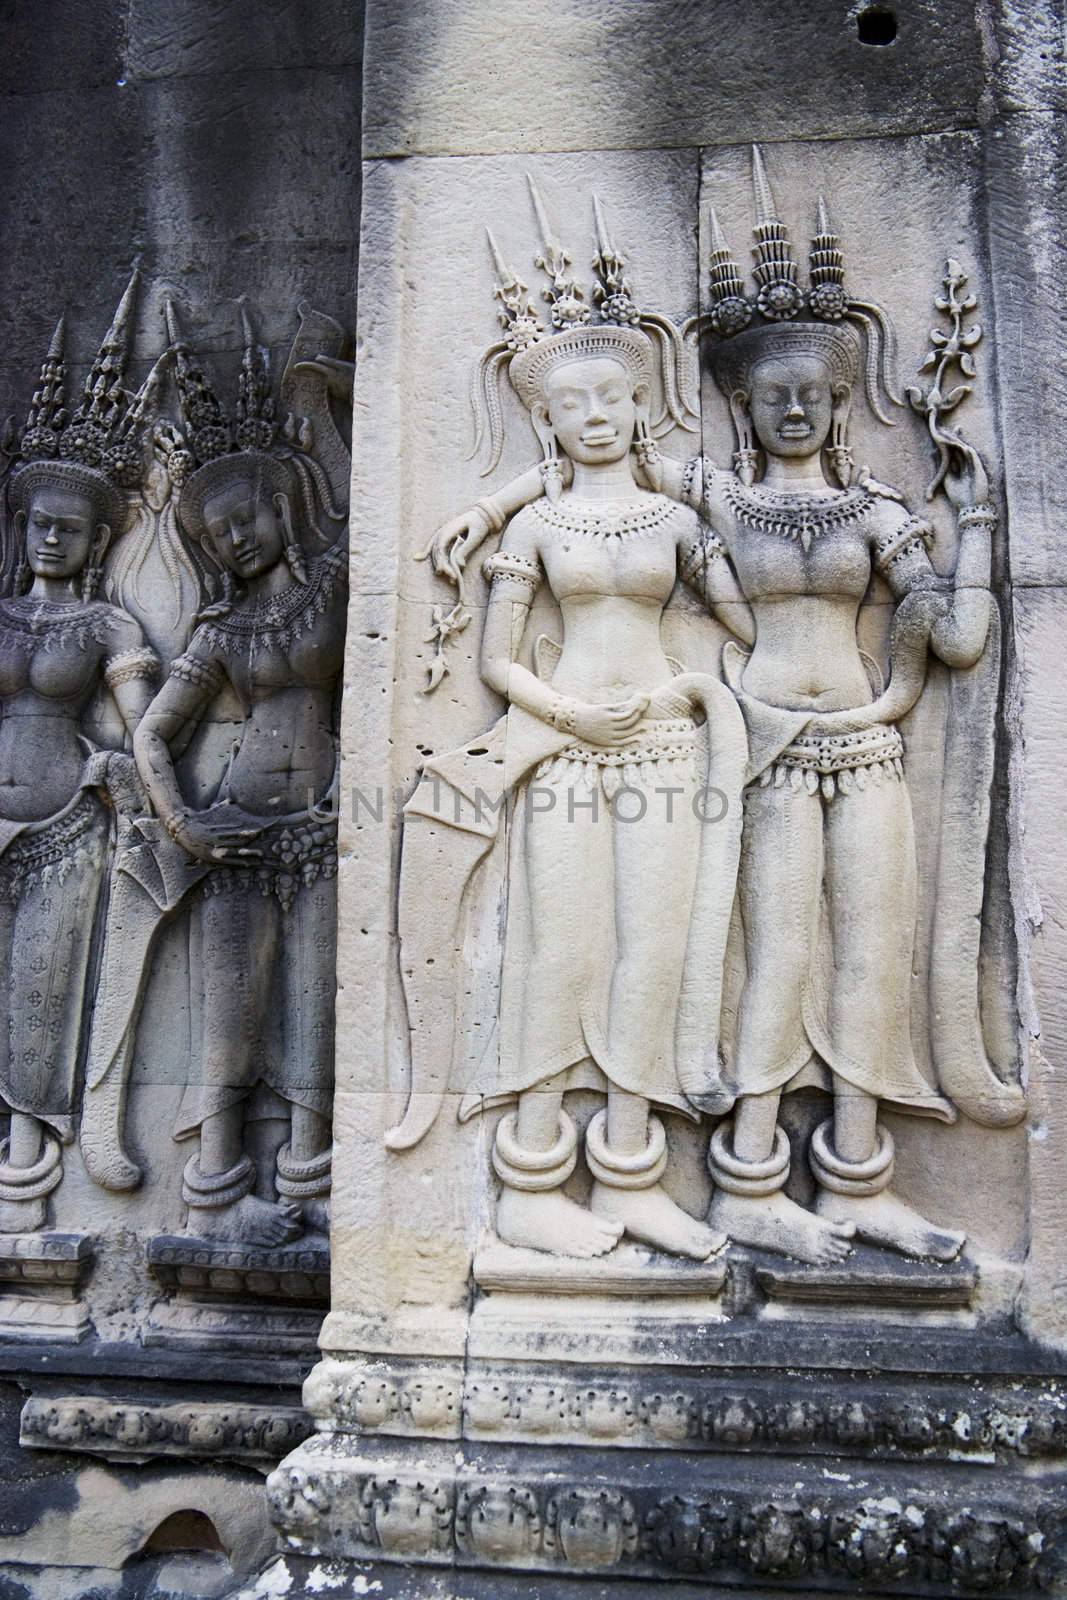 Ancient bas-relief at UNESCO's World Heritage Site of Angkor Wat, located at Siem Reap, Cambodia.